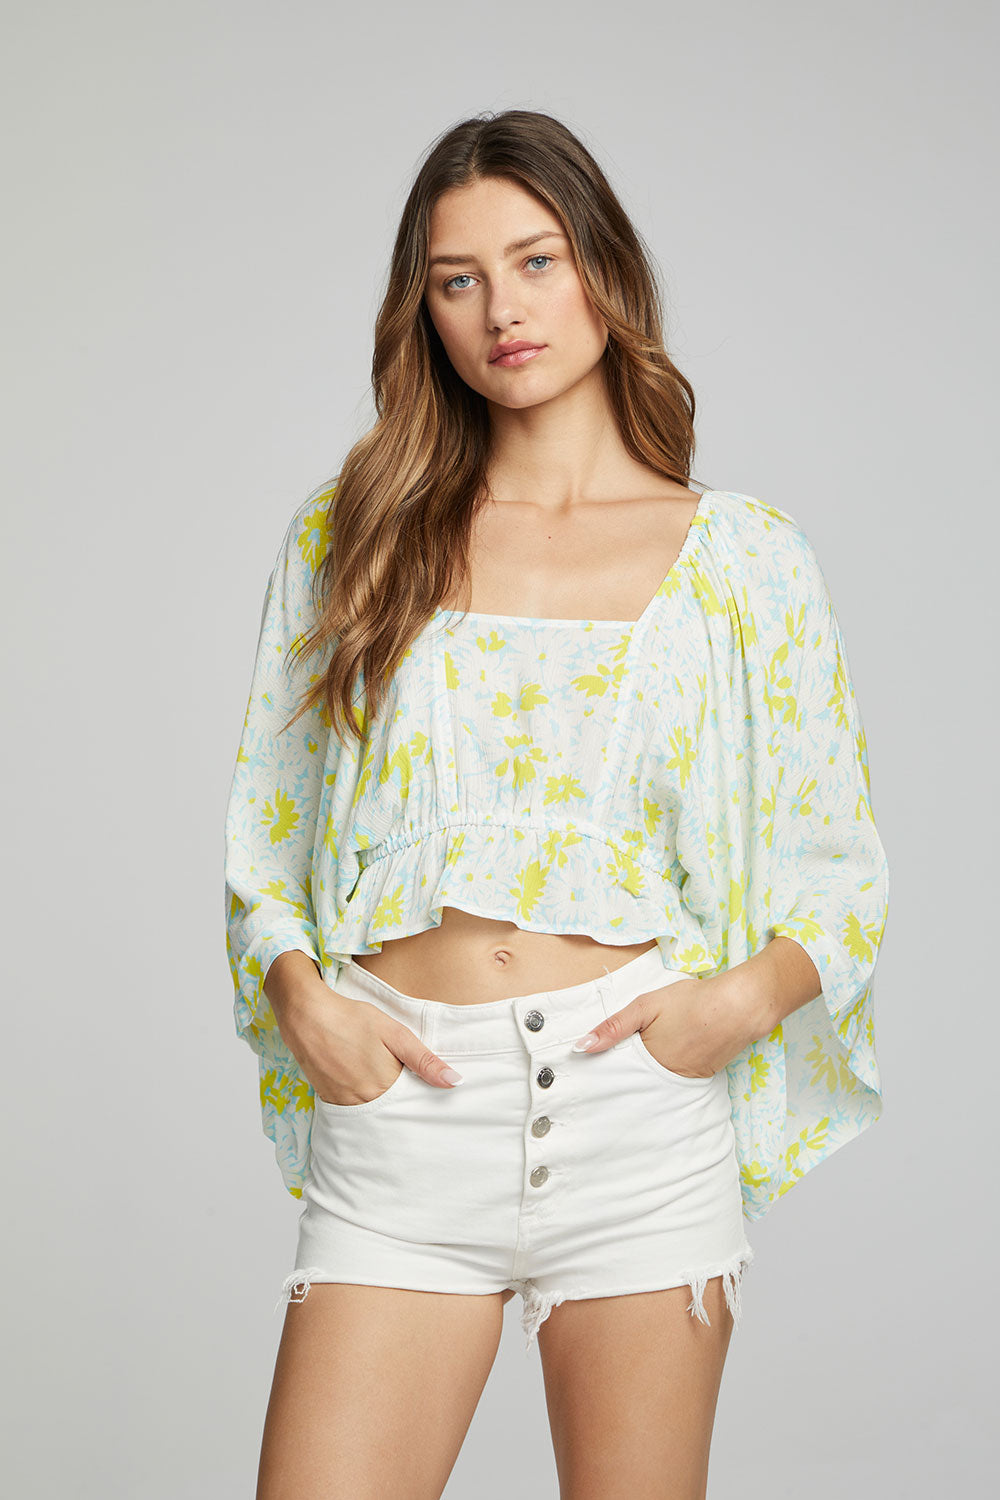 Monarch Crop Top - Daisy Floral Print WOMENS chaserbrand